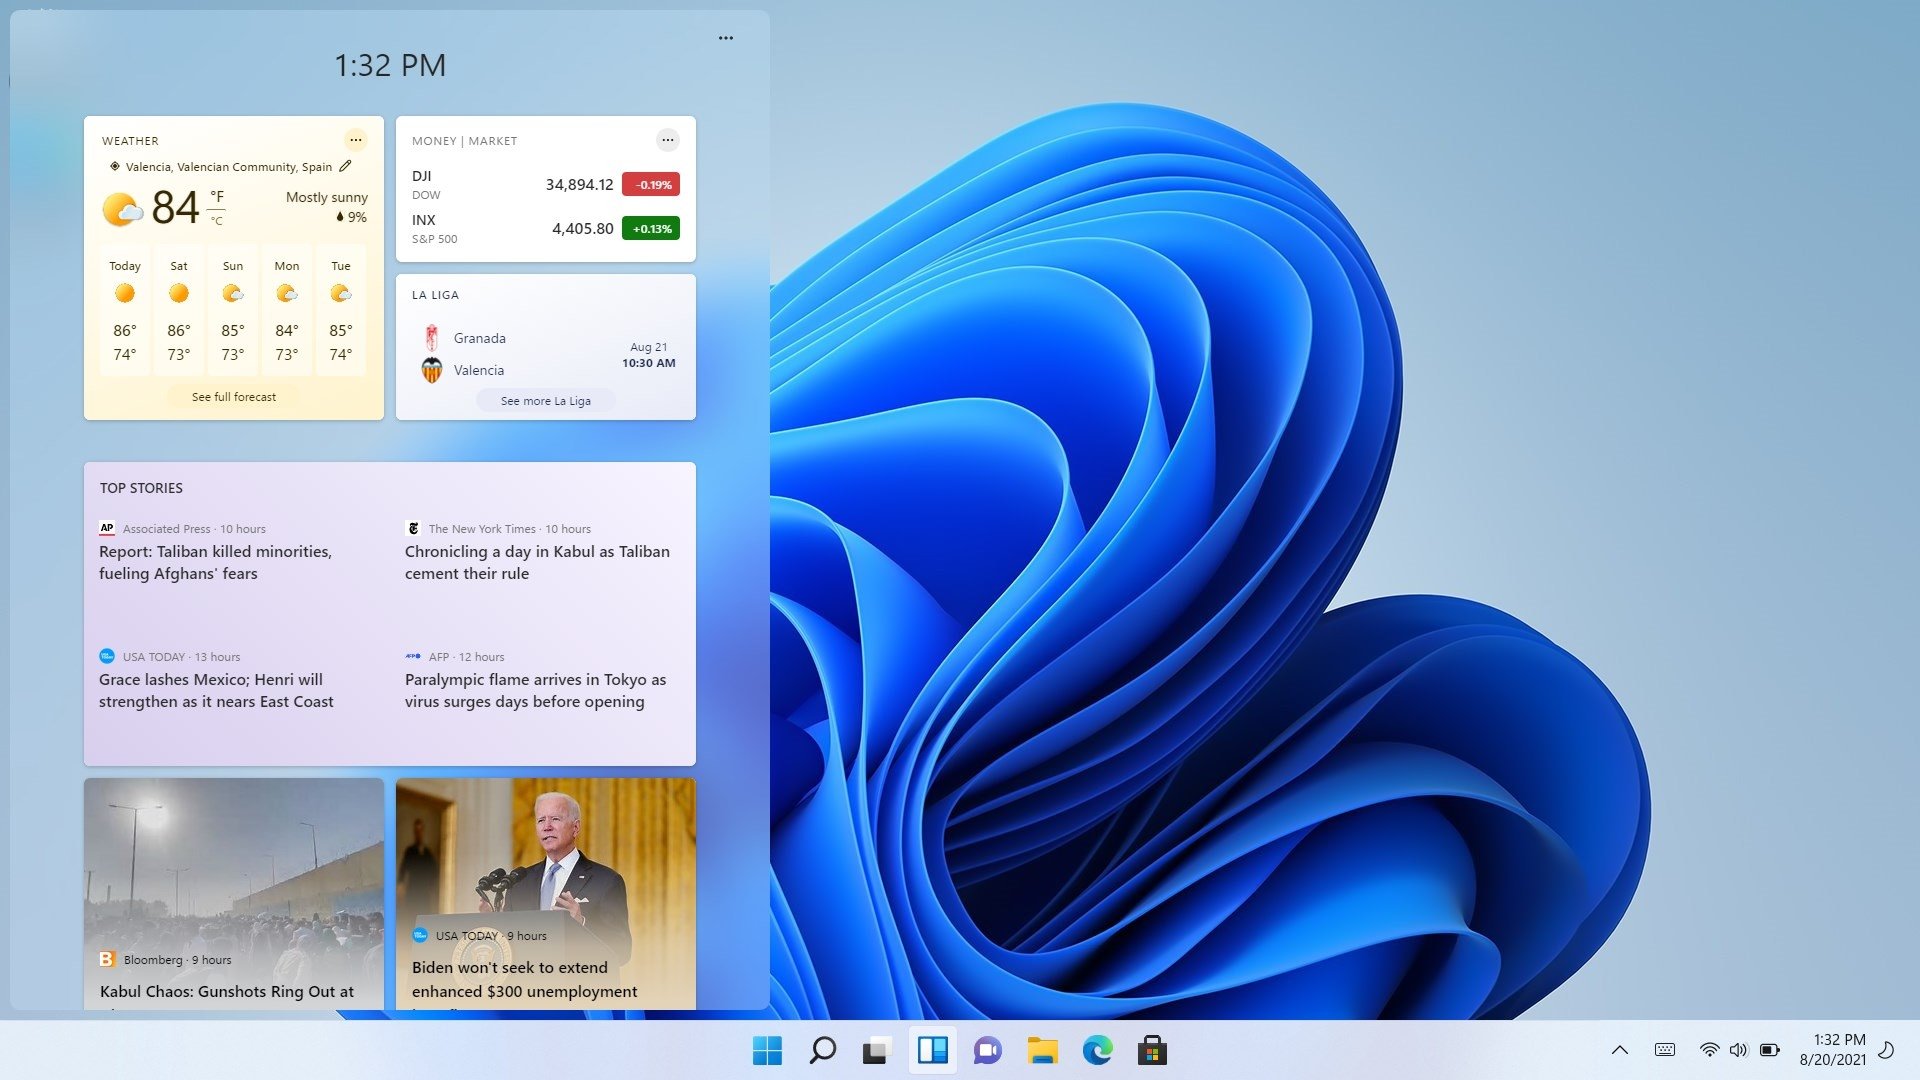 Windows 11 22H2 - Download for PC Free